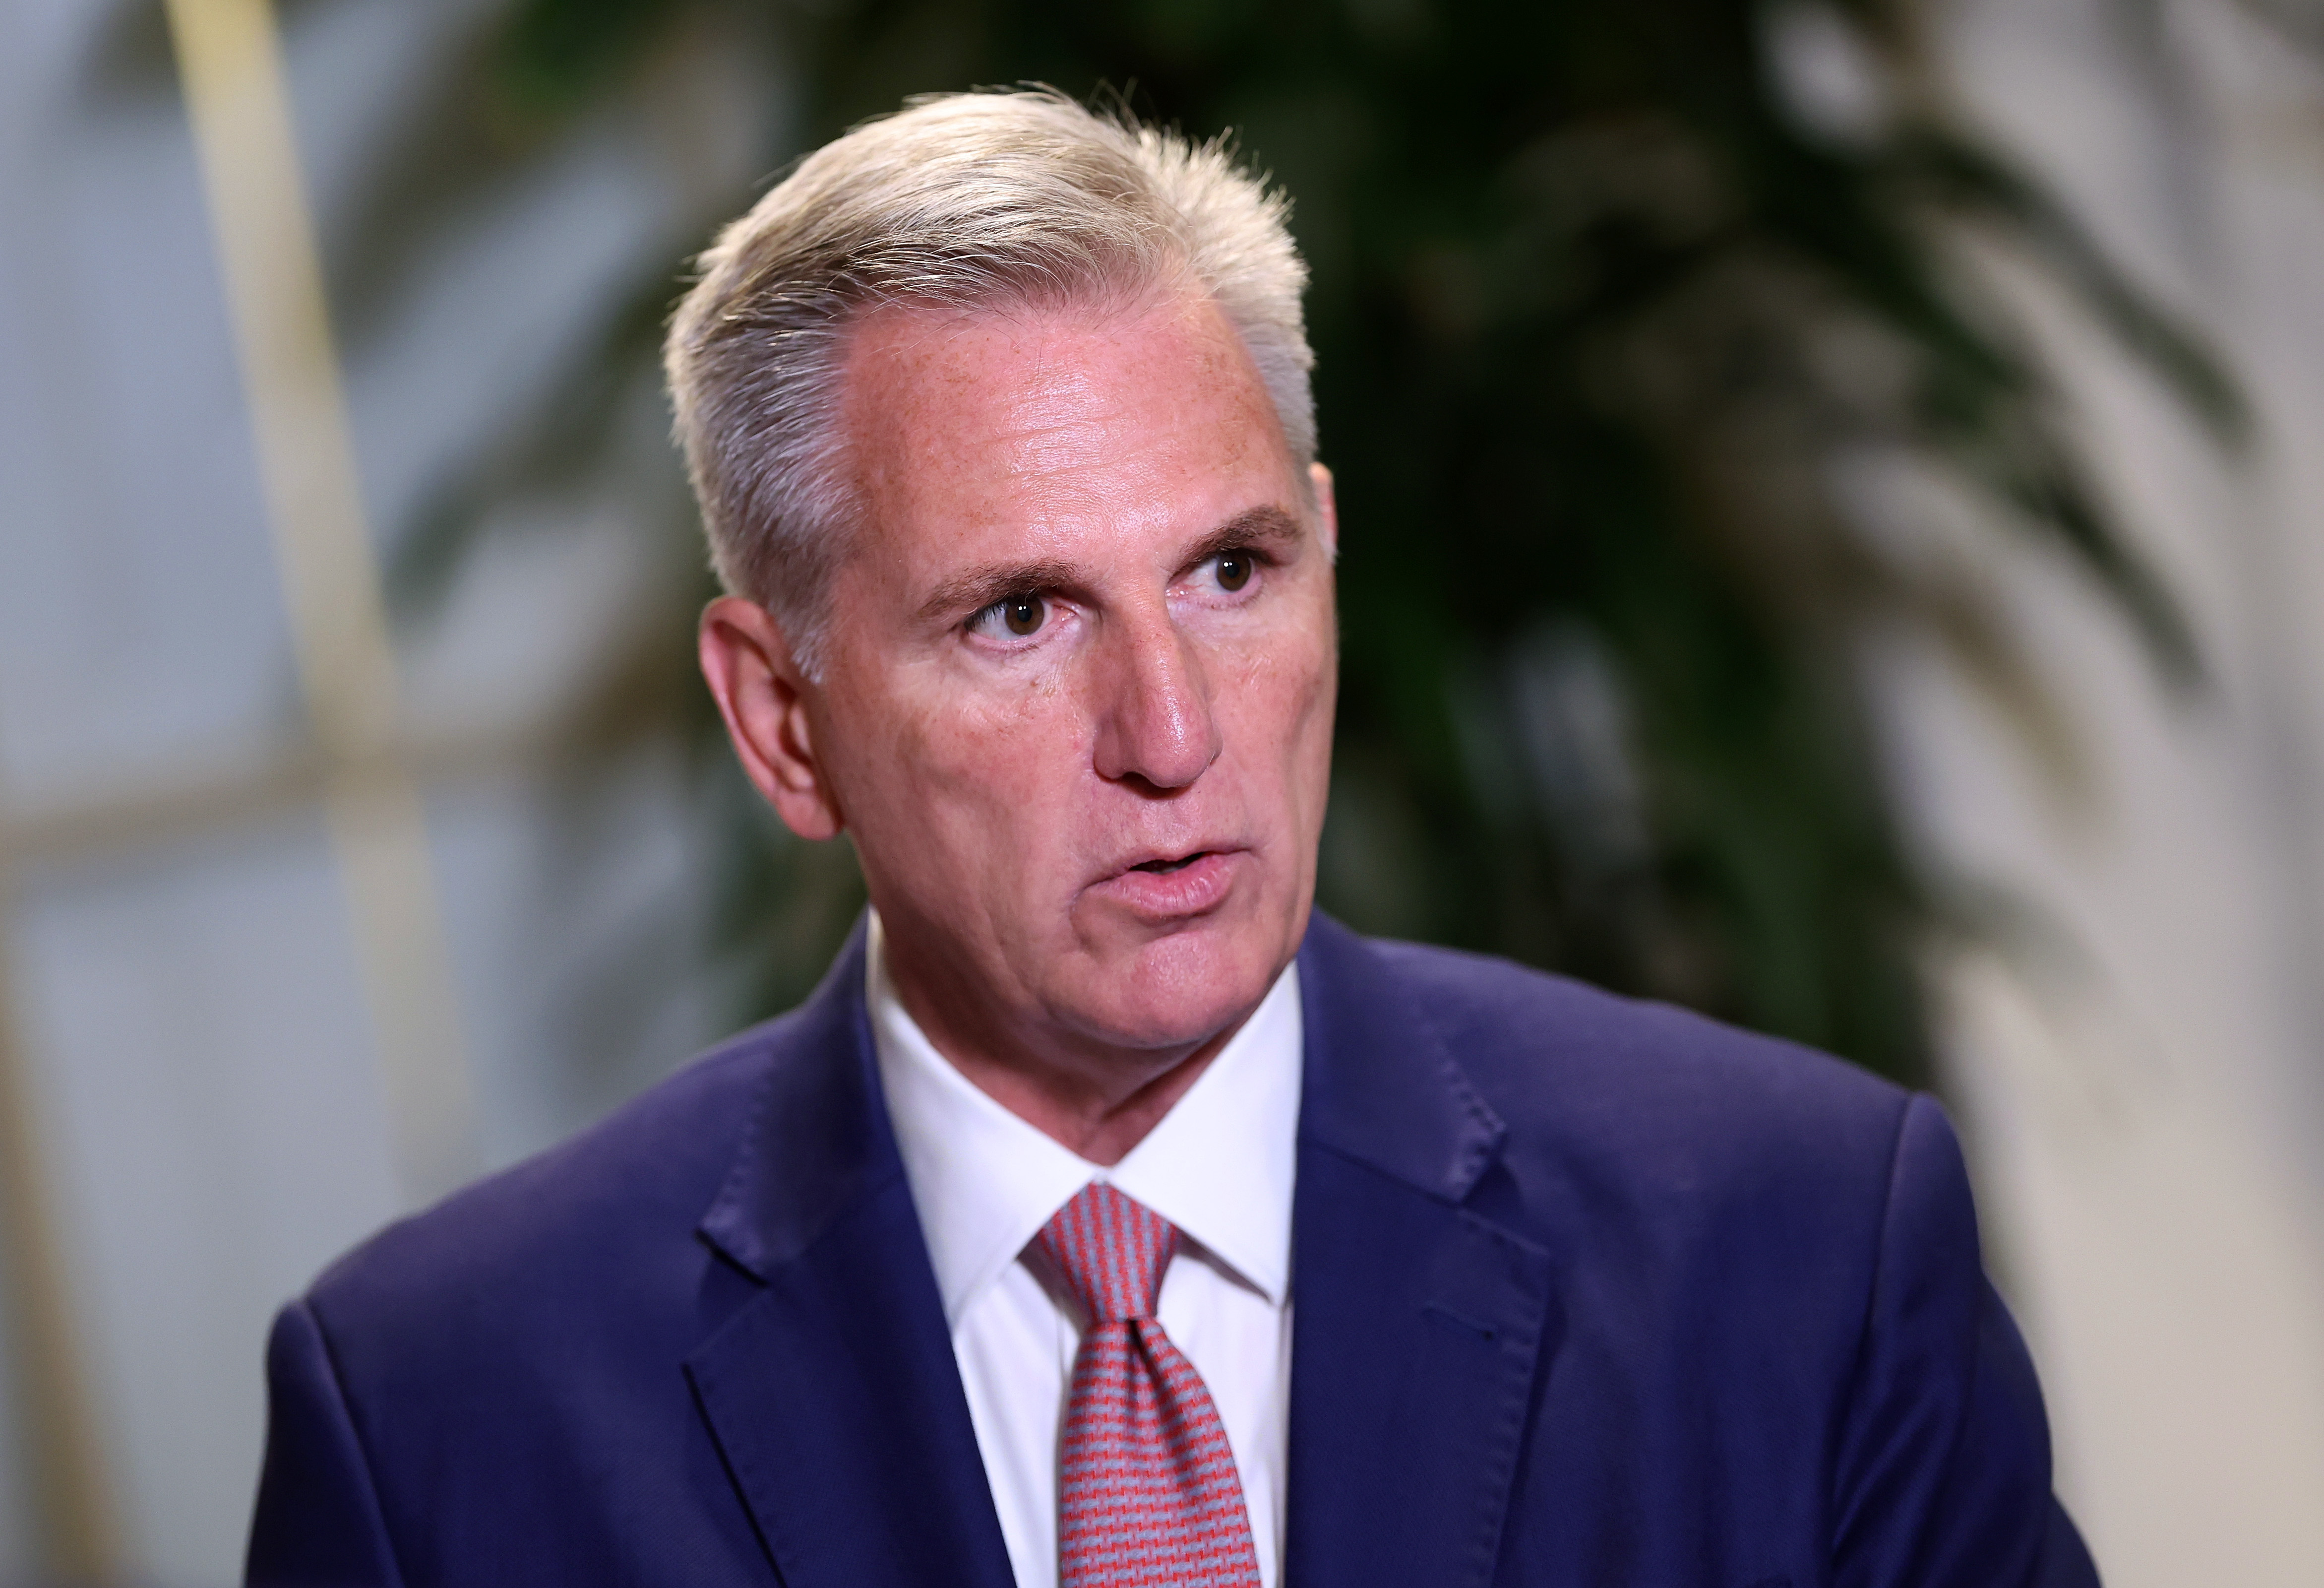 McCarthy clashed with conservative Republicans who threatened to overthrow him.